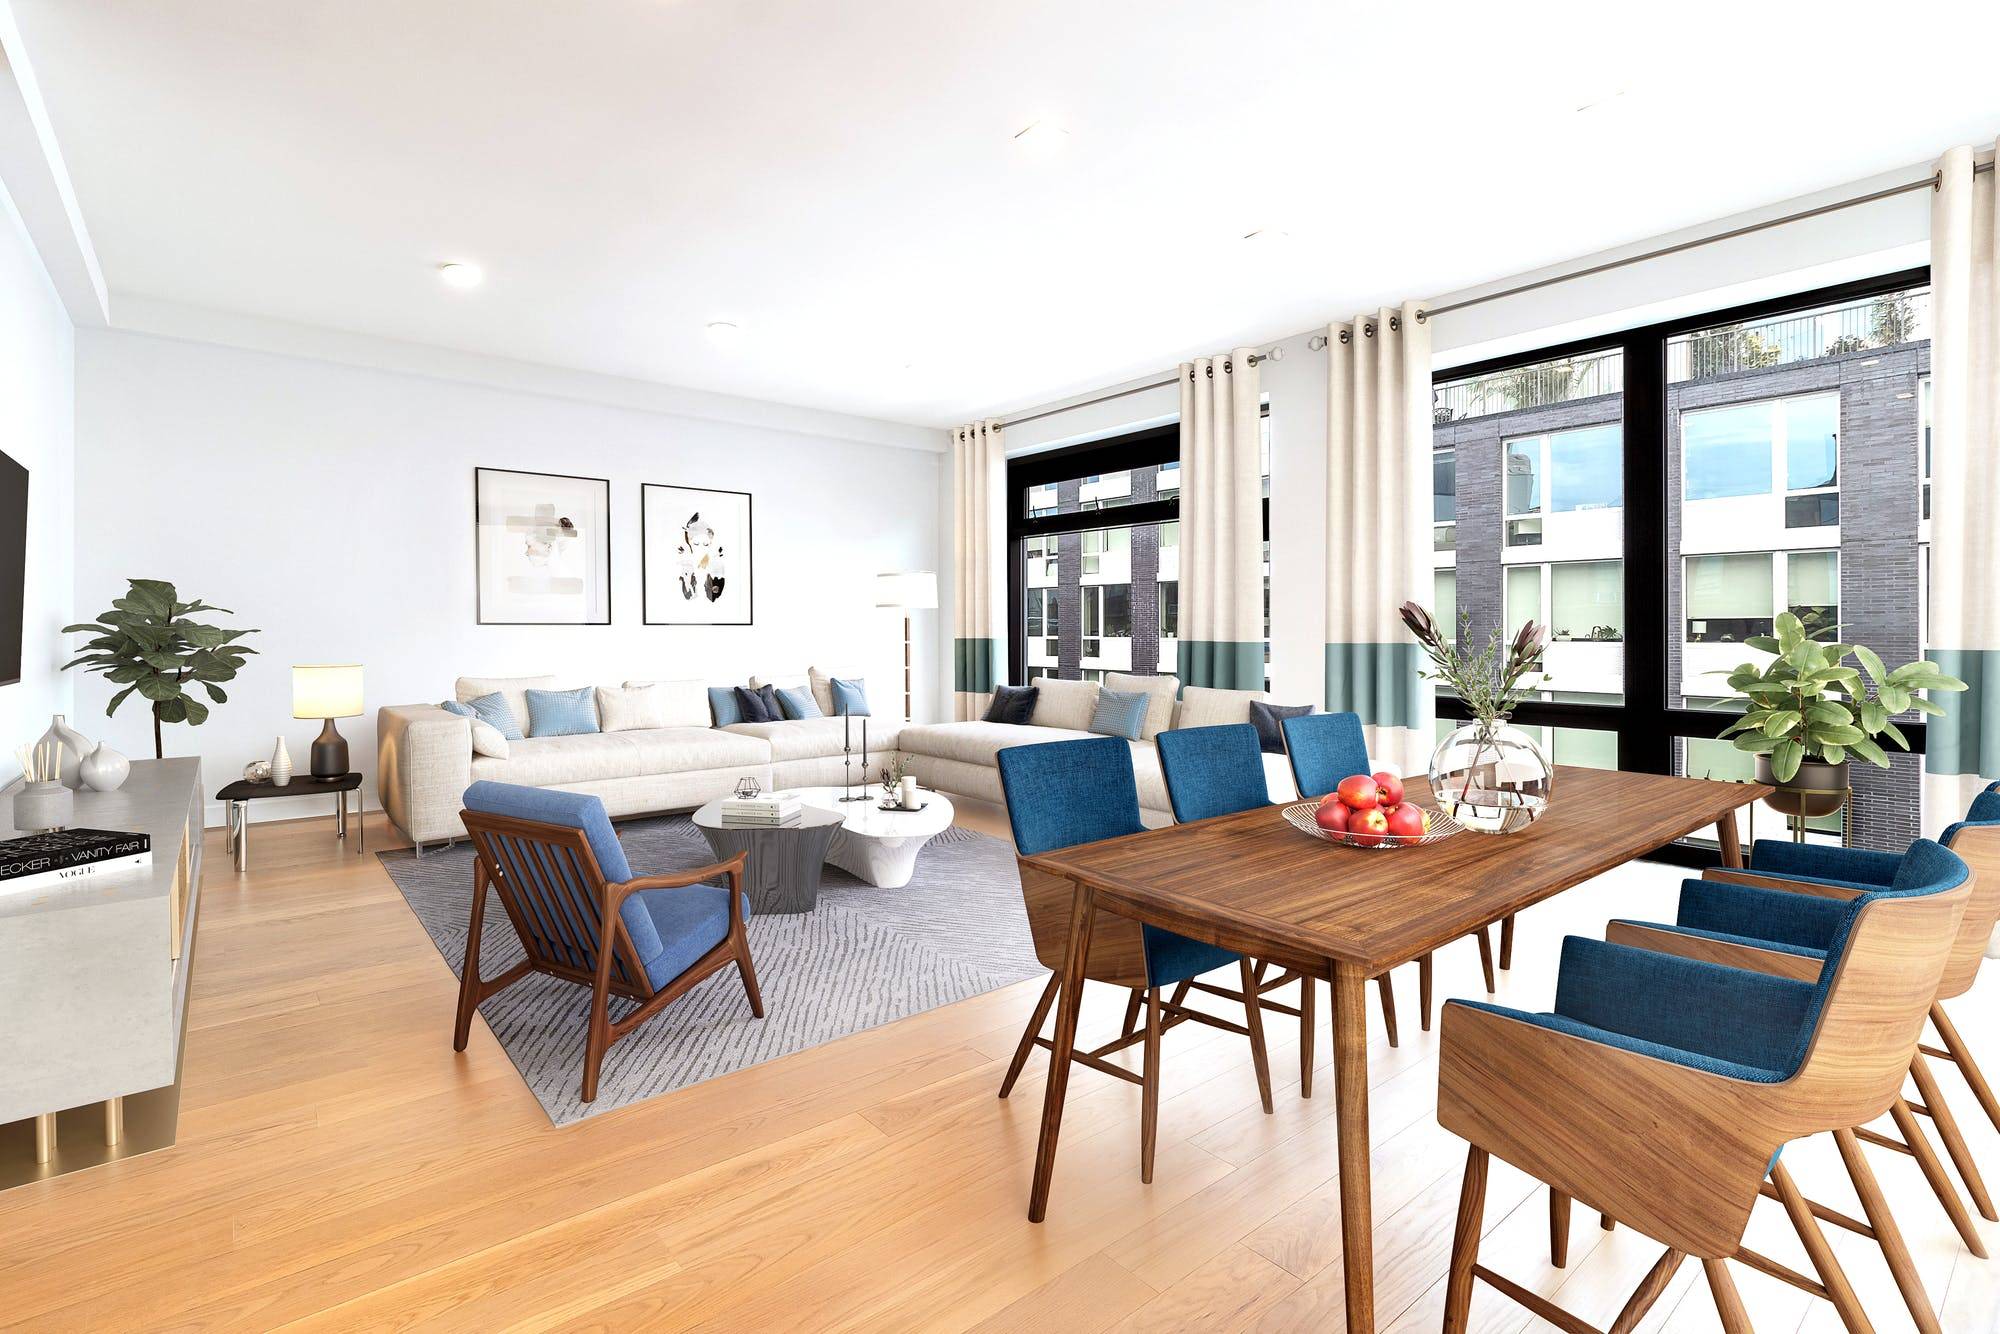 Welcome to The William Each apartment in this newly developed, state of the art building offers loft like living in the heart of the East Village.